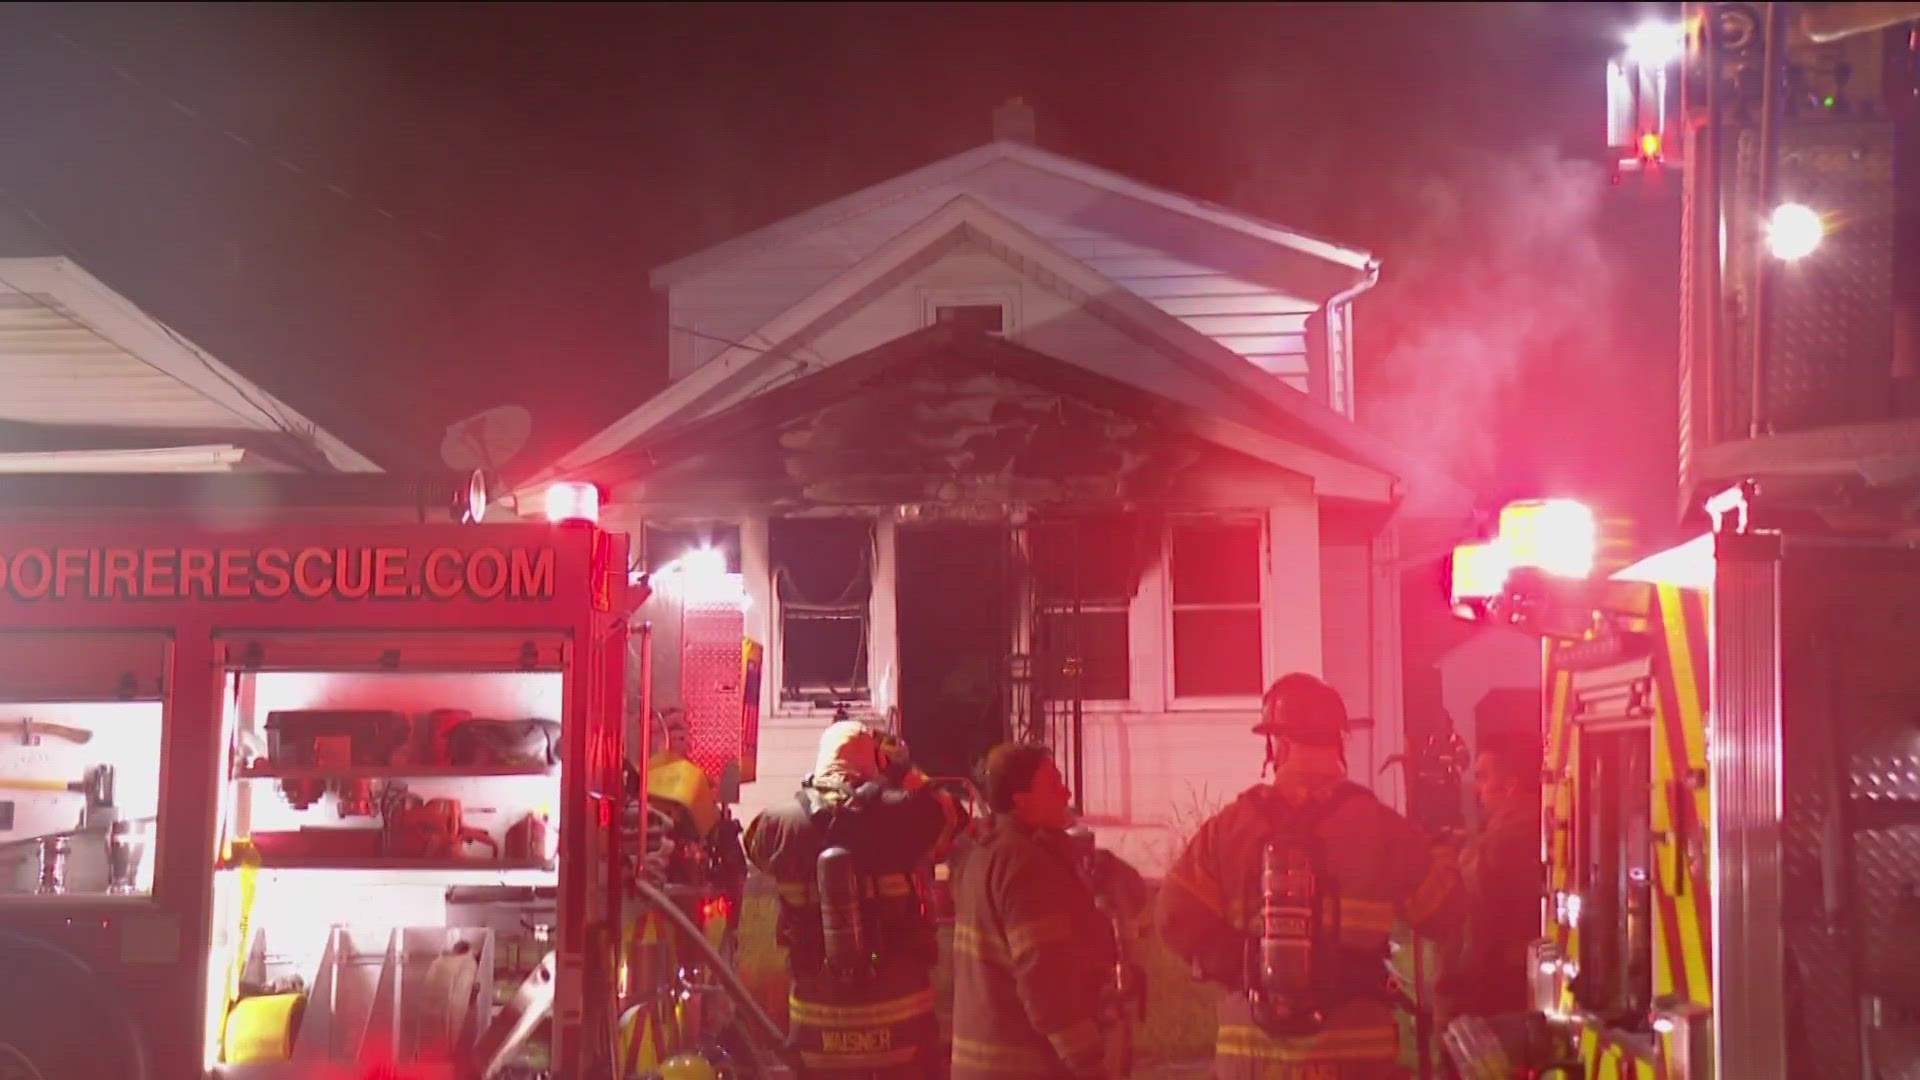 Officials tell WTOL 11 a mother and daughter escaped out of the burning home and were transported to the hospital for injuries and smoke inhalation.